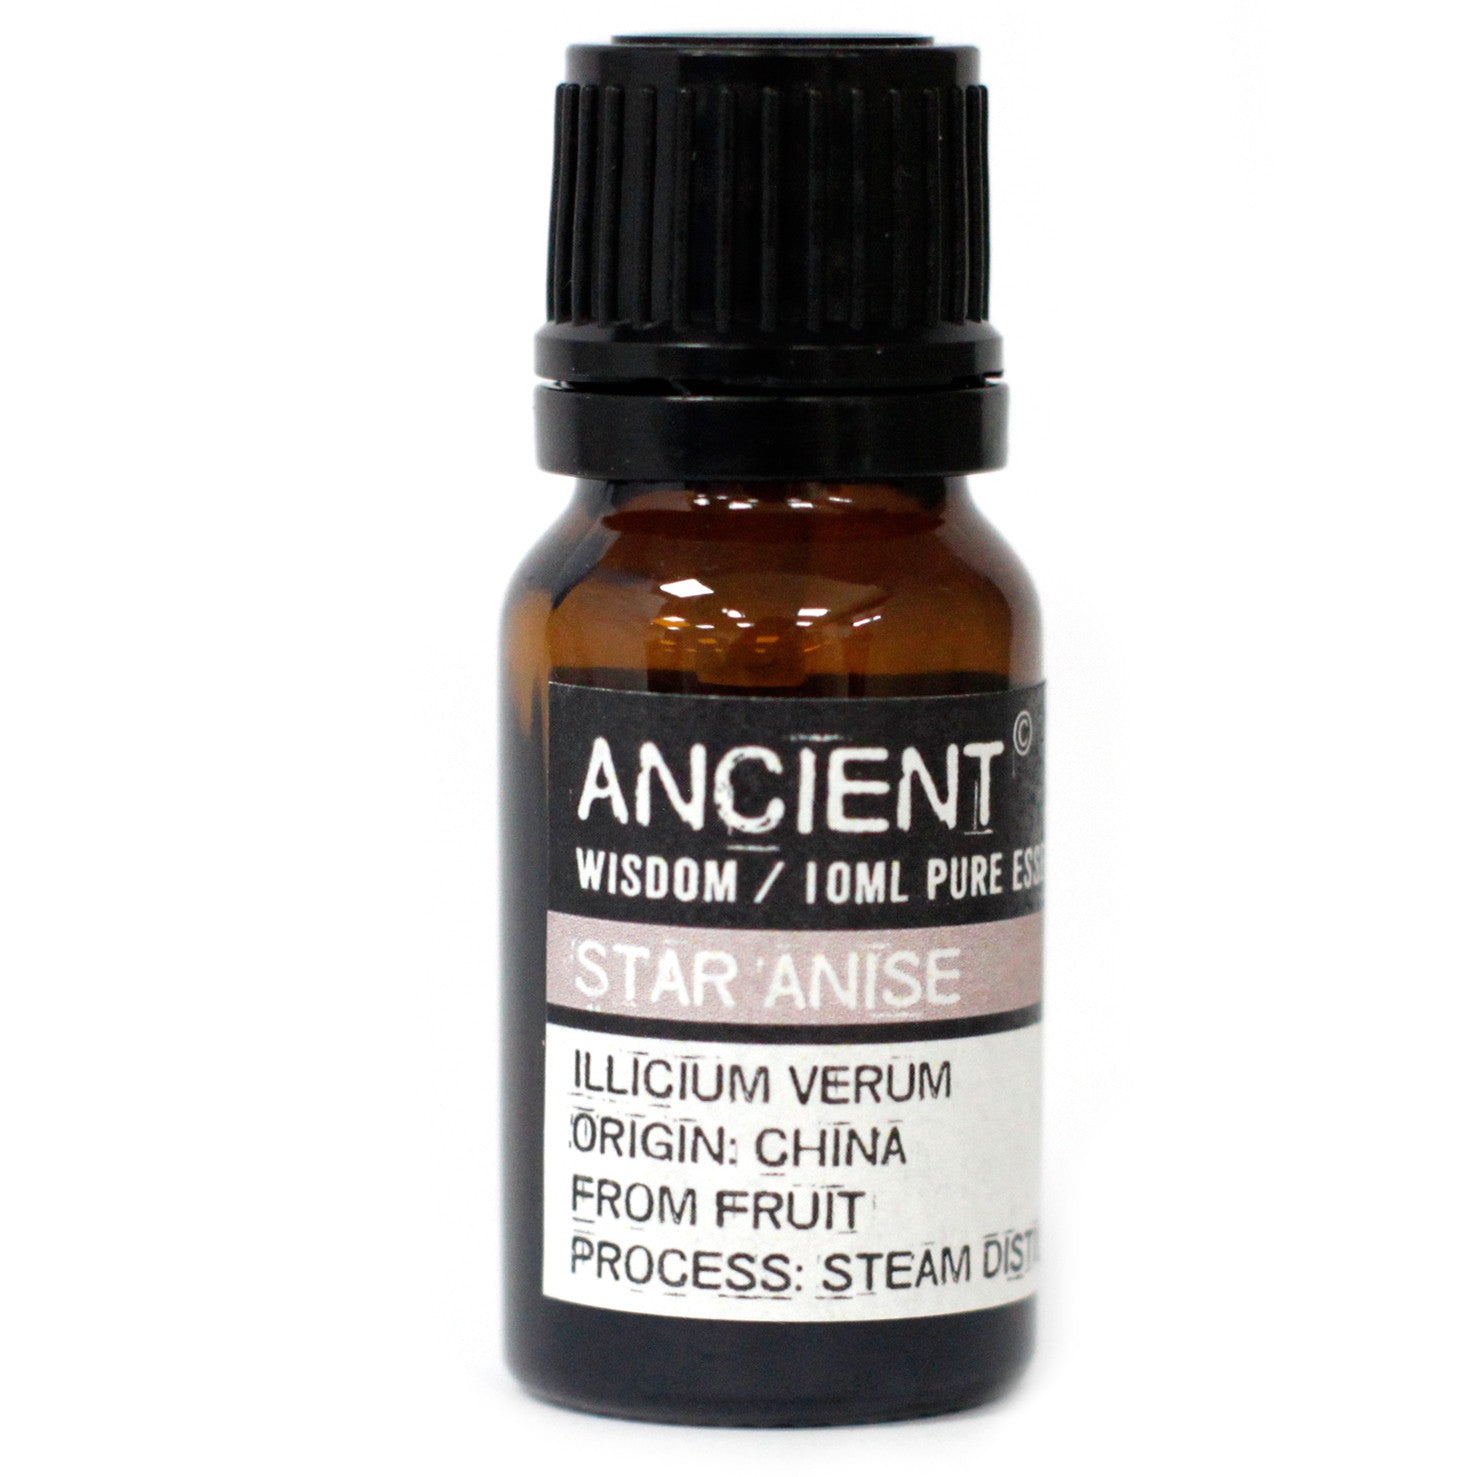 Aniseed China Star (Star Anise) Essential Oil - 10ml